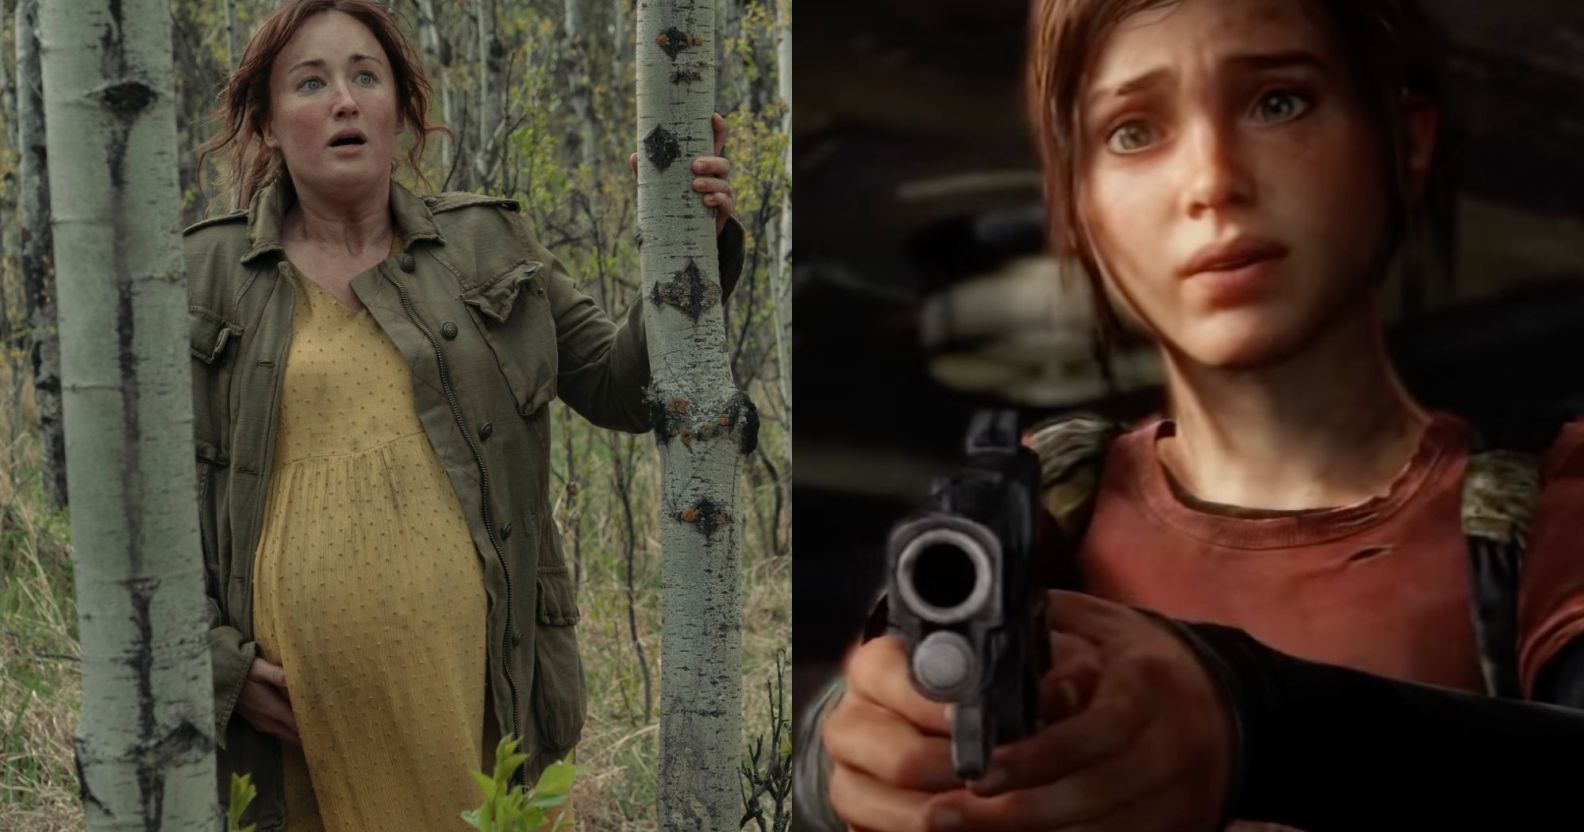 Ashley Johnson as Ellie's mother in The Last of Us and a still from The Last of Us video game showing Ellie with a gun.